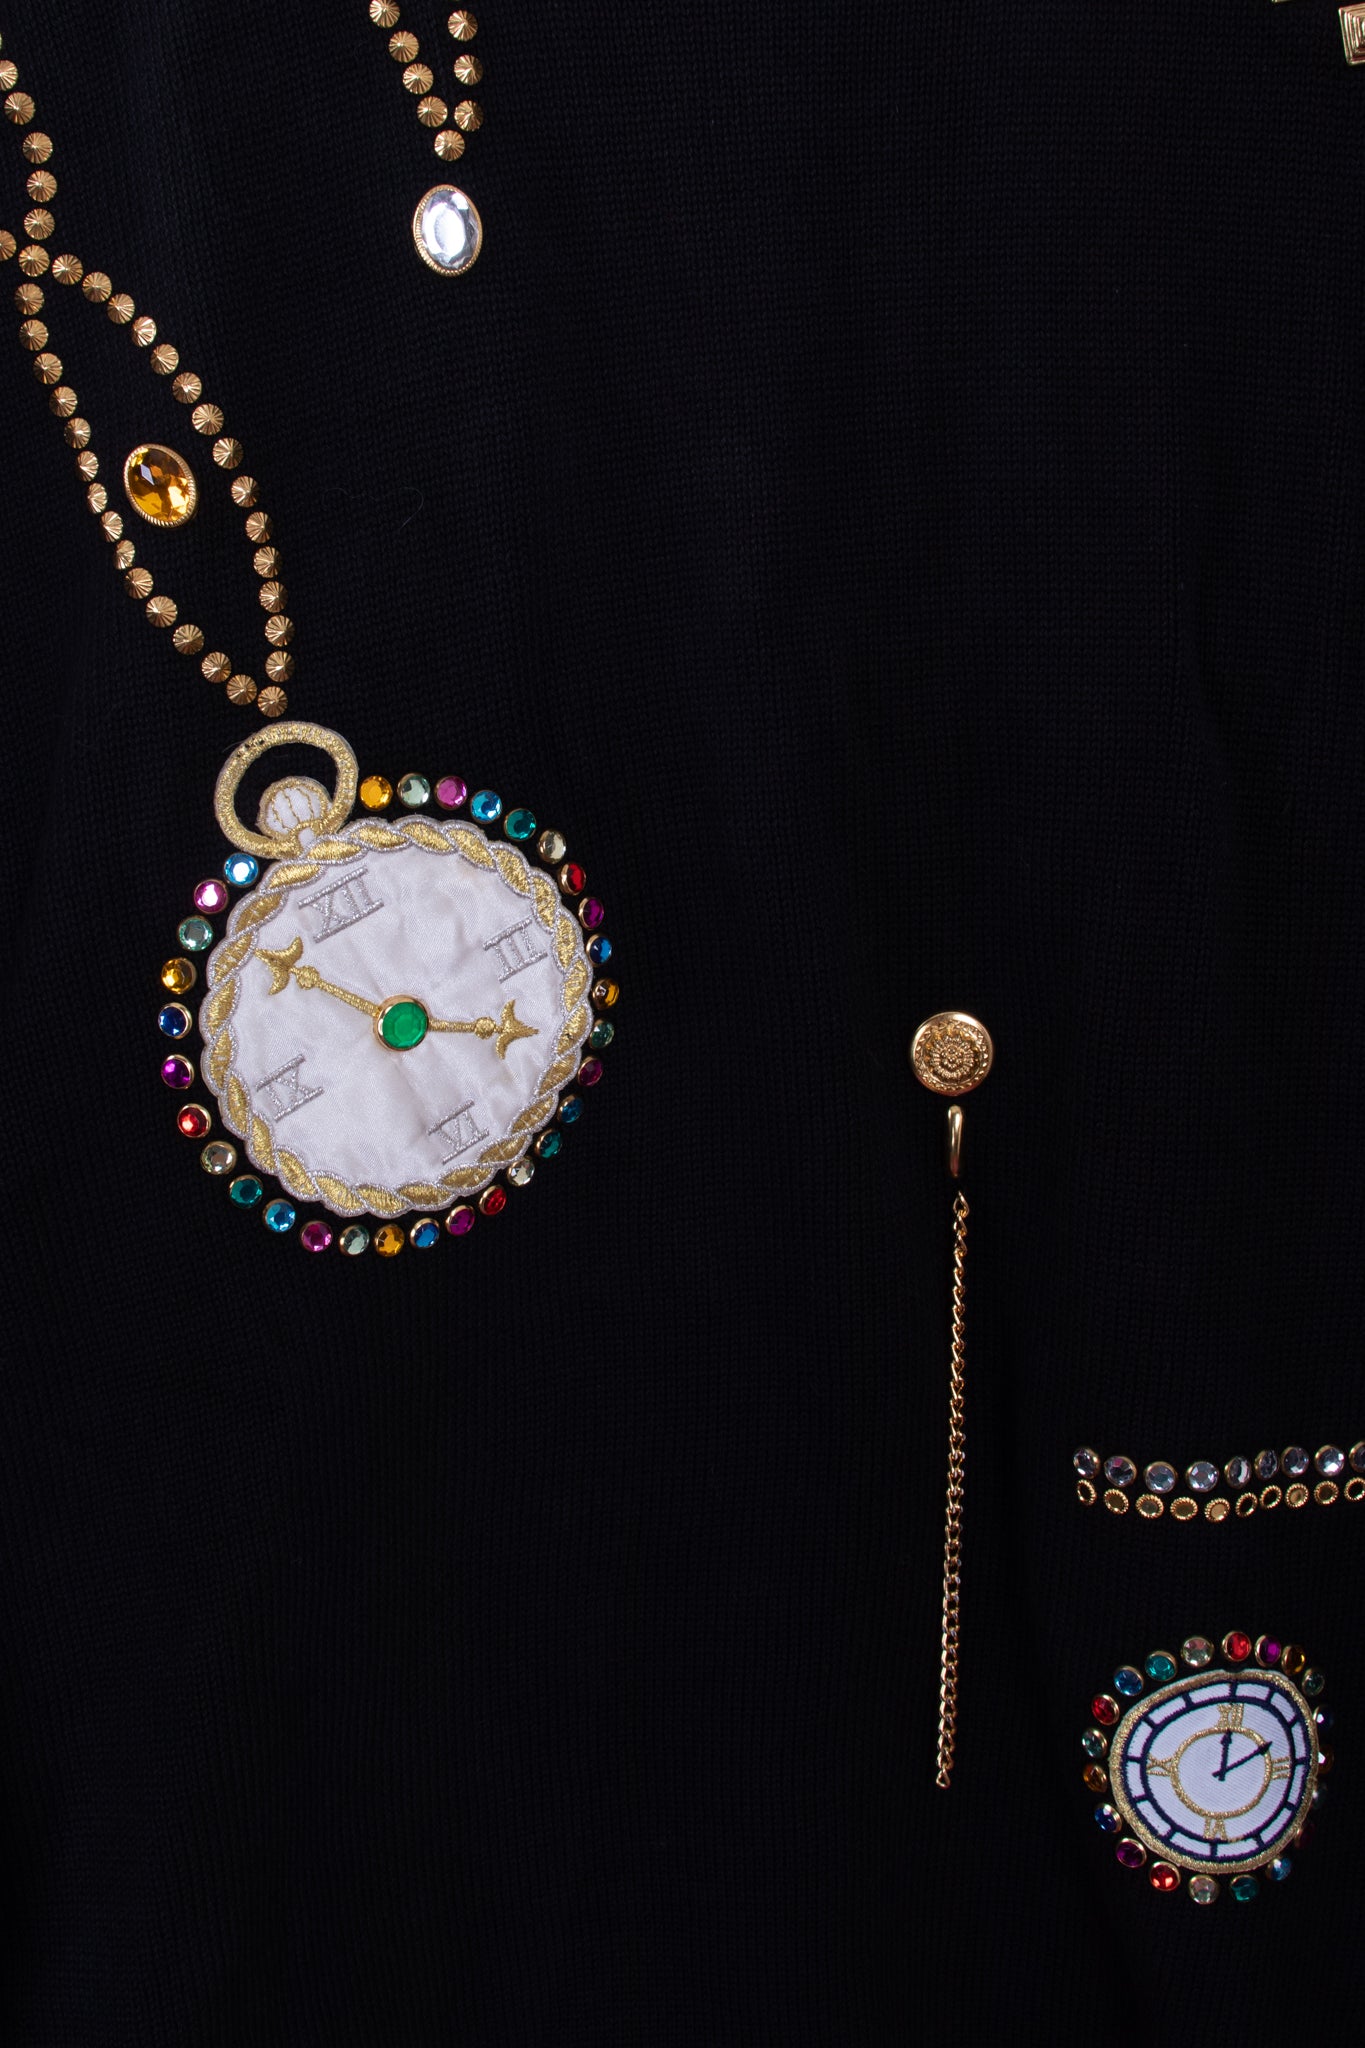 80s-90s Clodia Dee Jeweled Pocket Watches Sweater